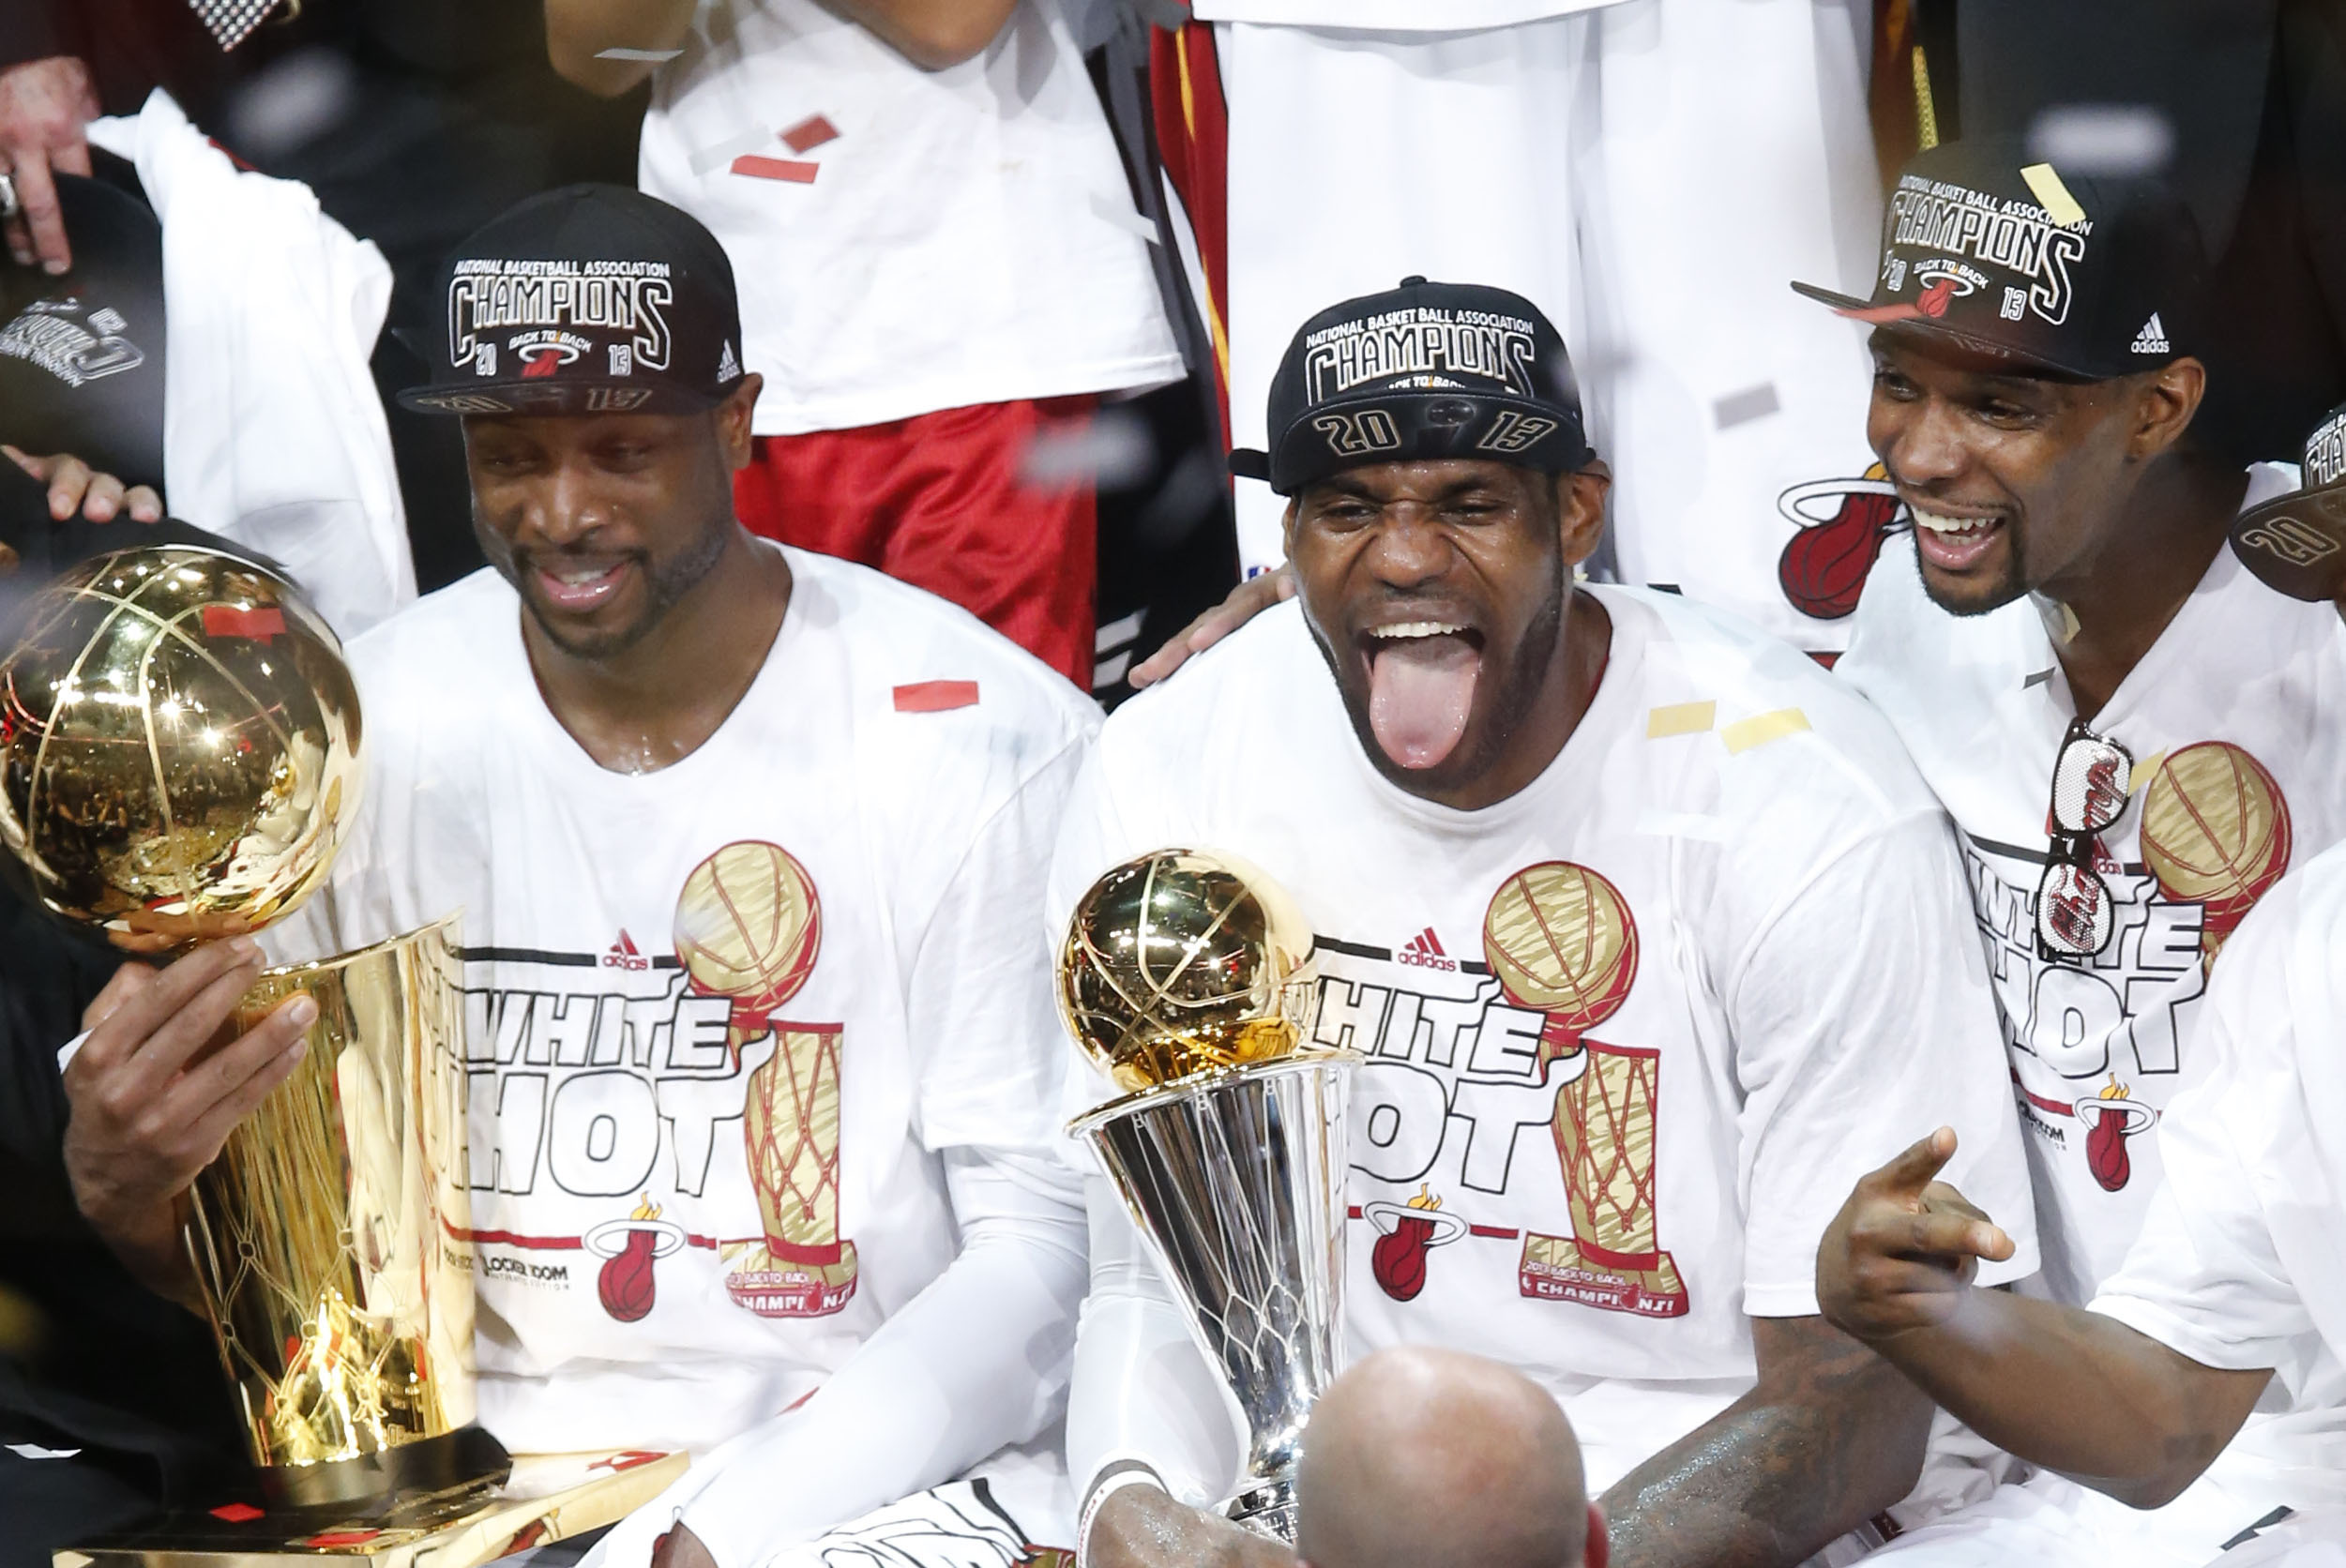 Why the Miami Heat turned from a play-in team to a championship